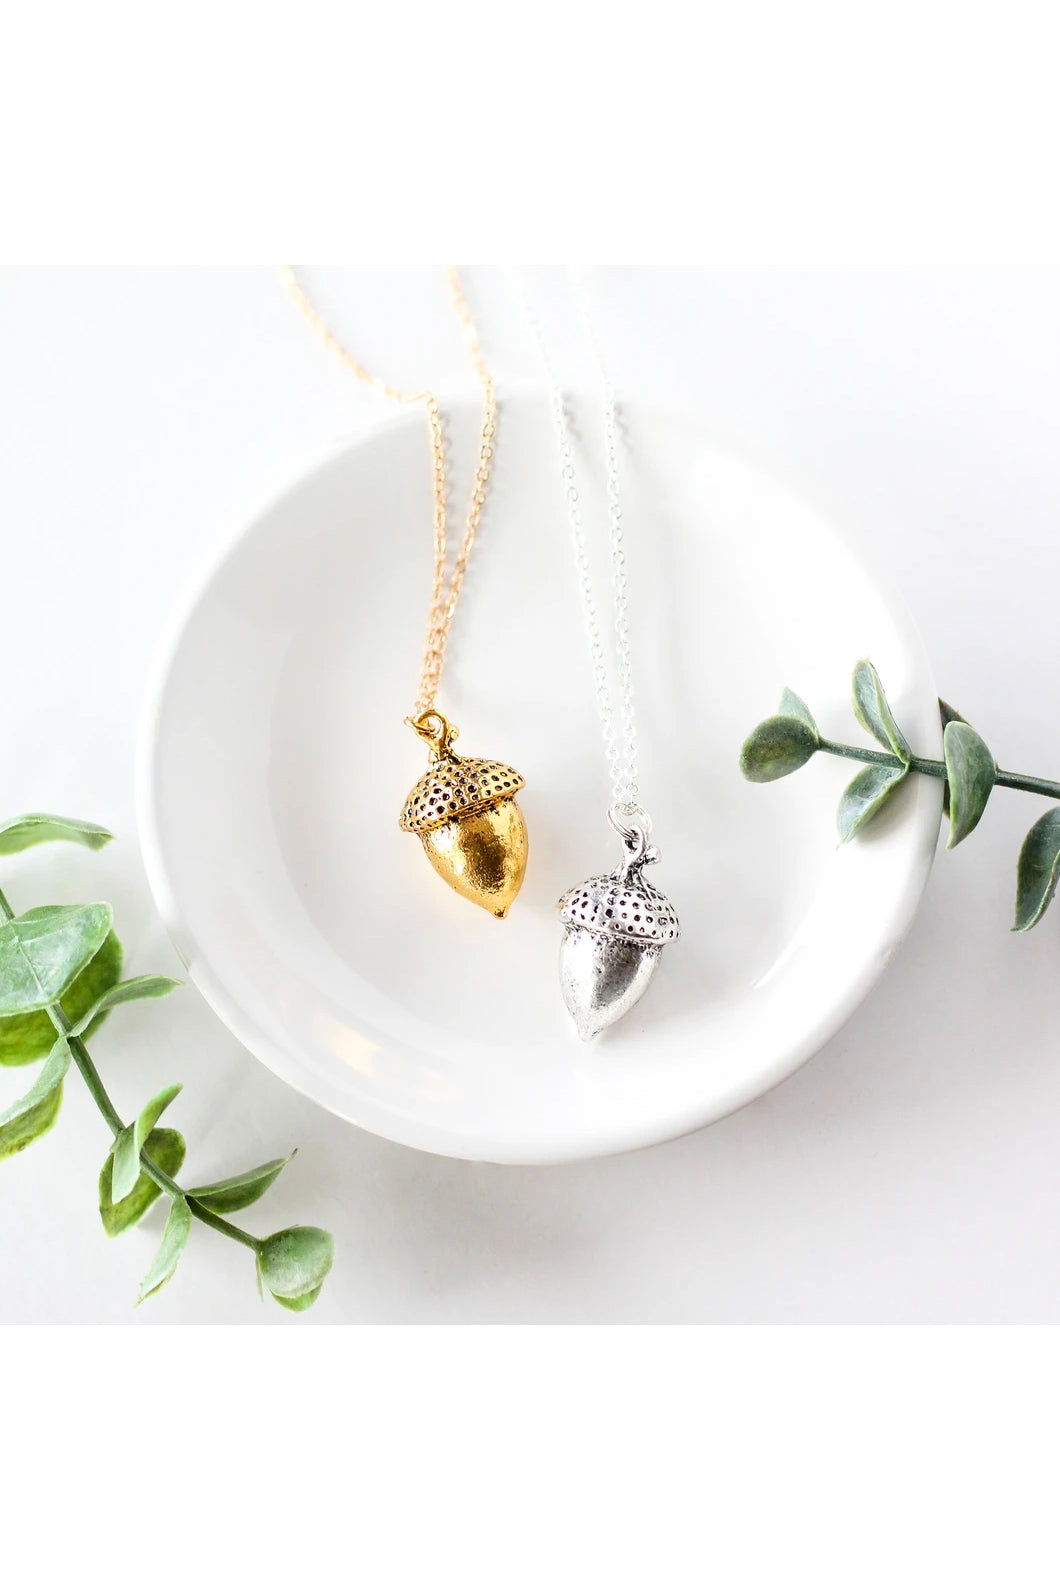 Large acorn necklace by Birch Jewellery; shown in silver and gold; flat lay; styling on a white ceramic dish and with eucalyptus branches